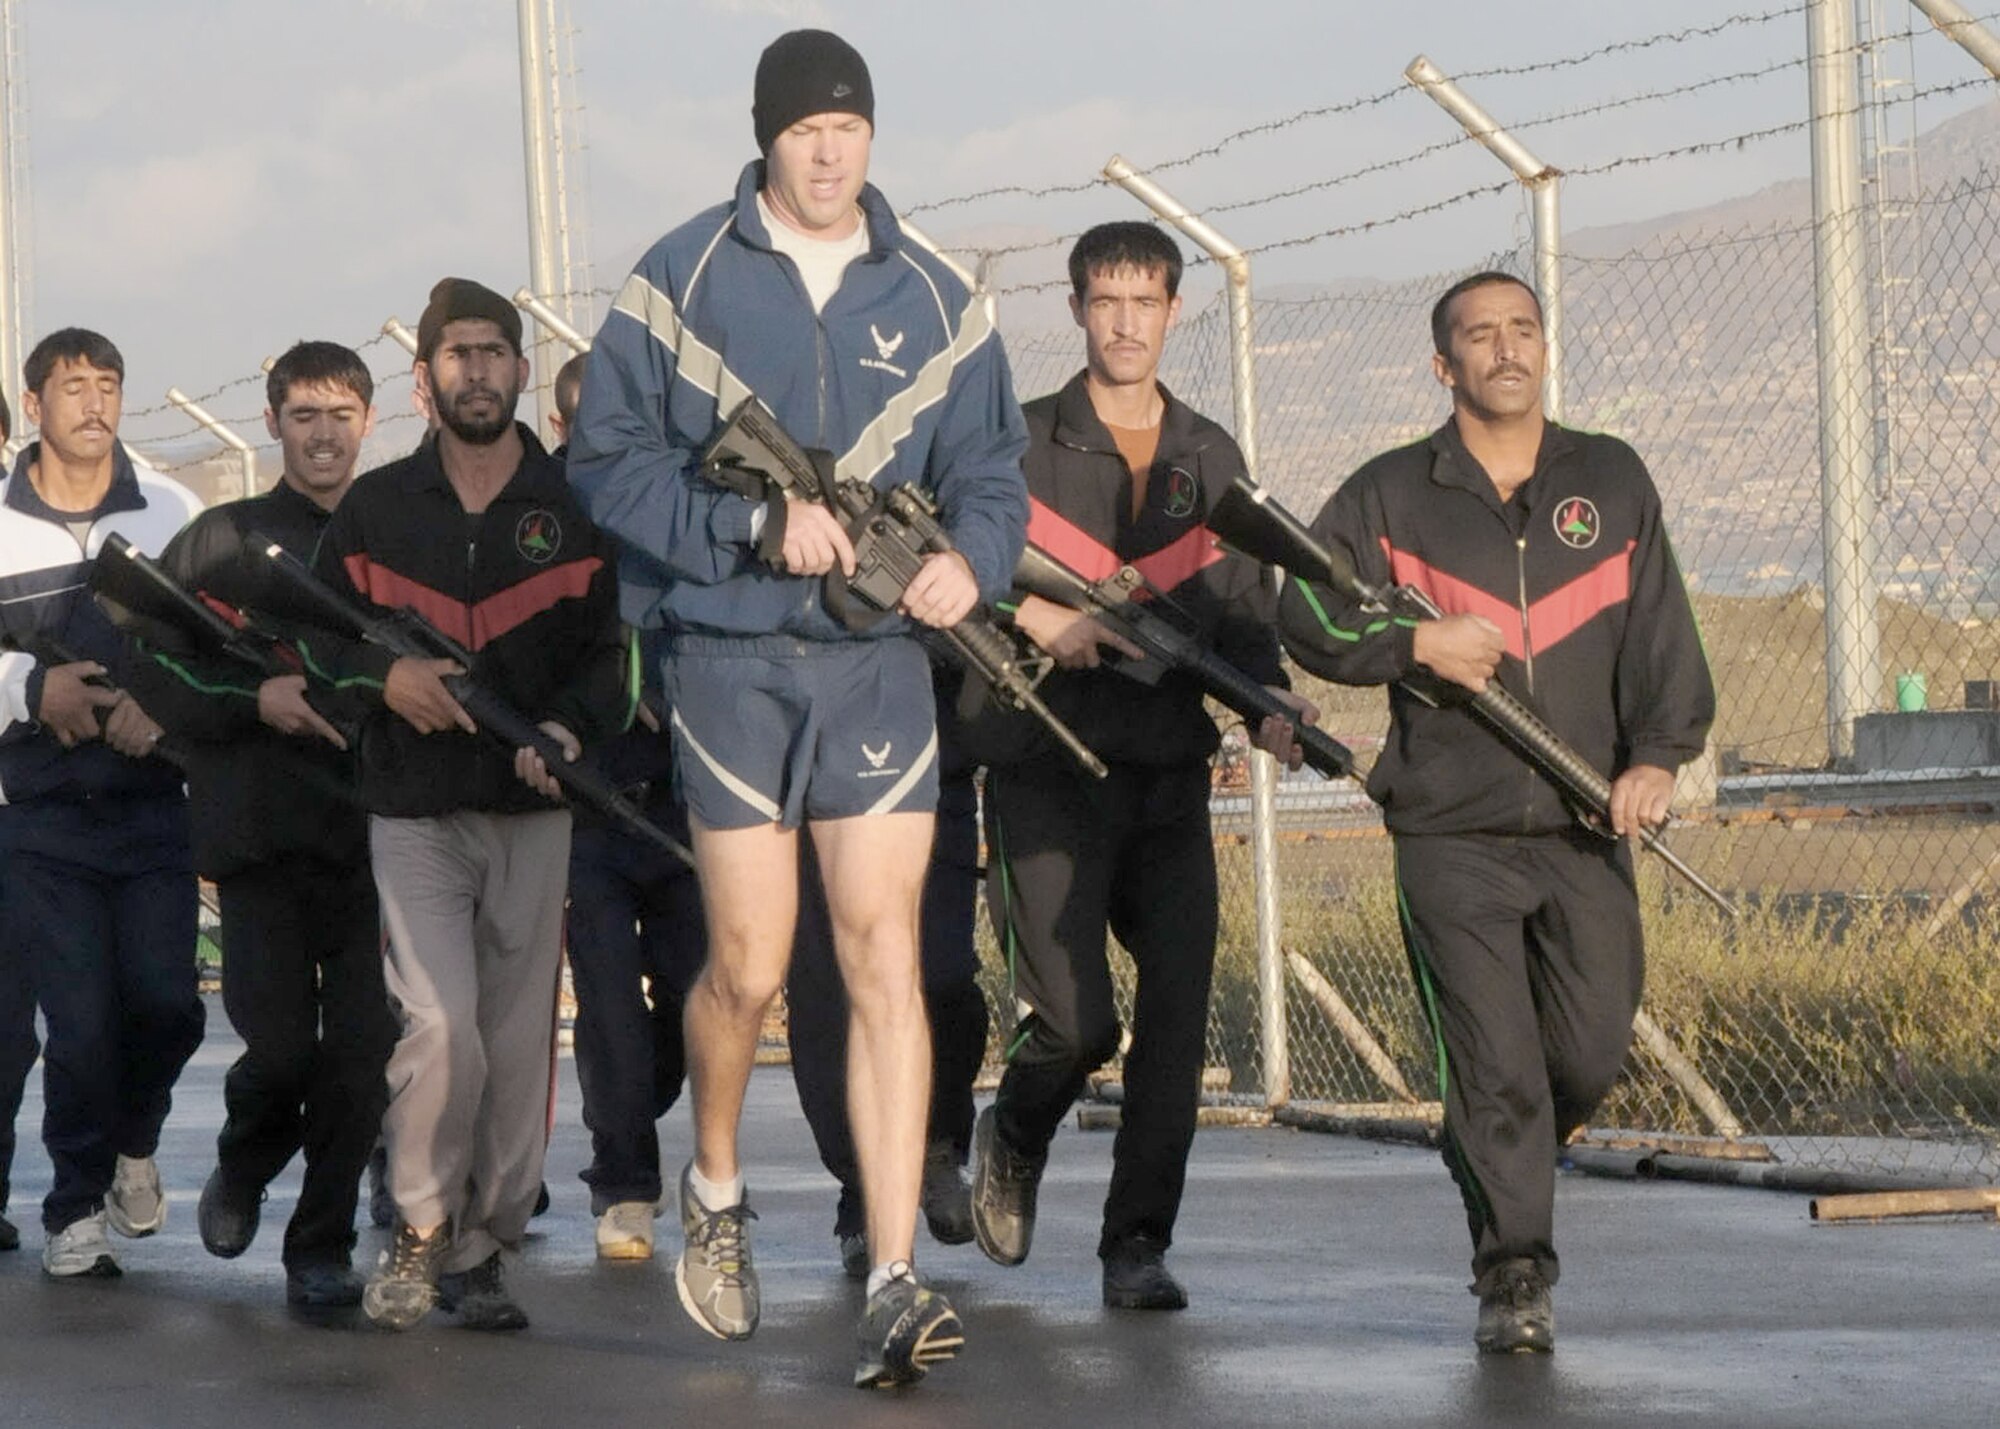 Afghan air force security forces members engage in physical fitness with Capt. Robert Shaw Sept 30, 2010, in Kabul, Afghanistan. Captain Shaw is the NATO Air Training Command - Afghanistan adviser. (U.S. Navy photo/Petty Officer 3rd Class Jared Walker)